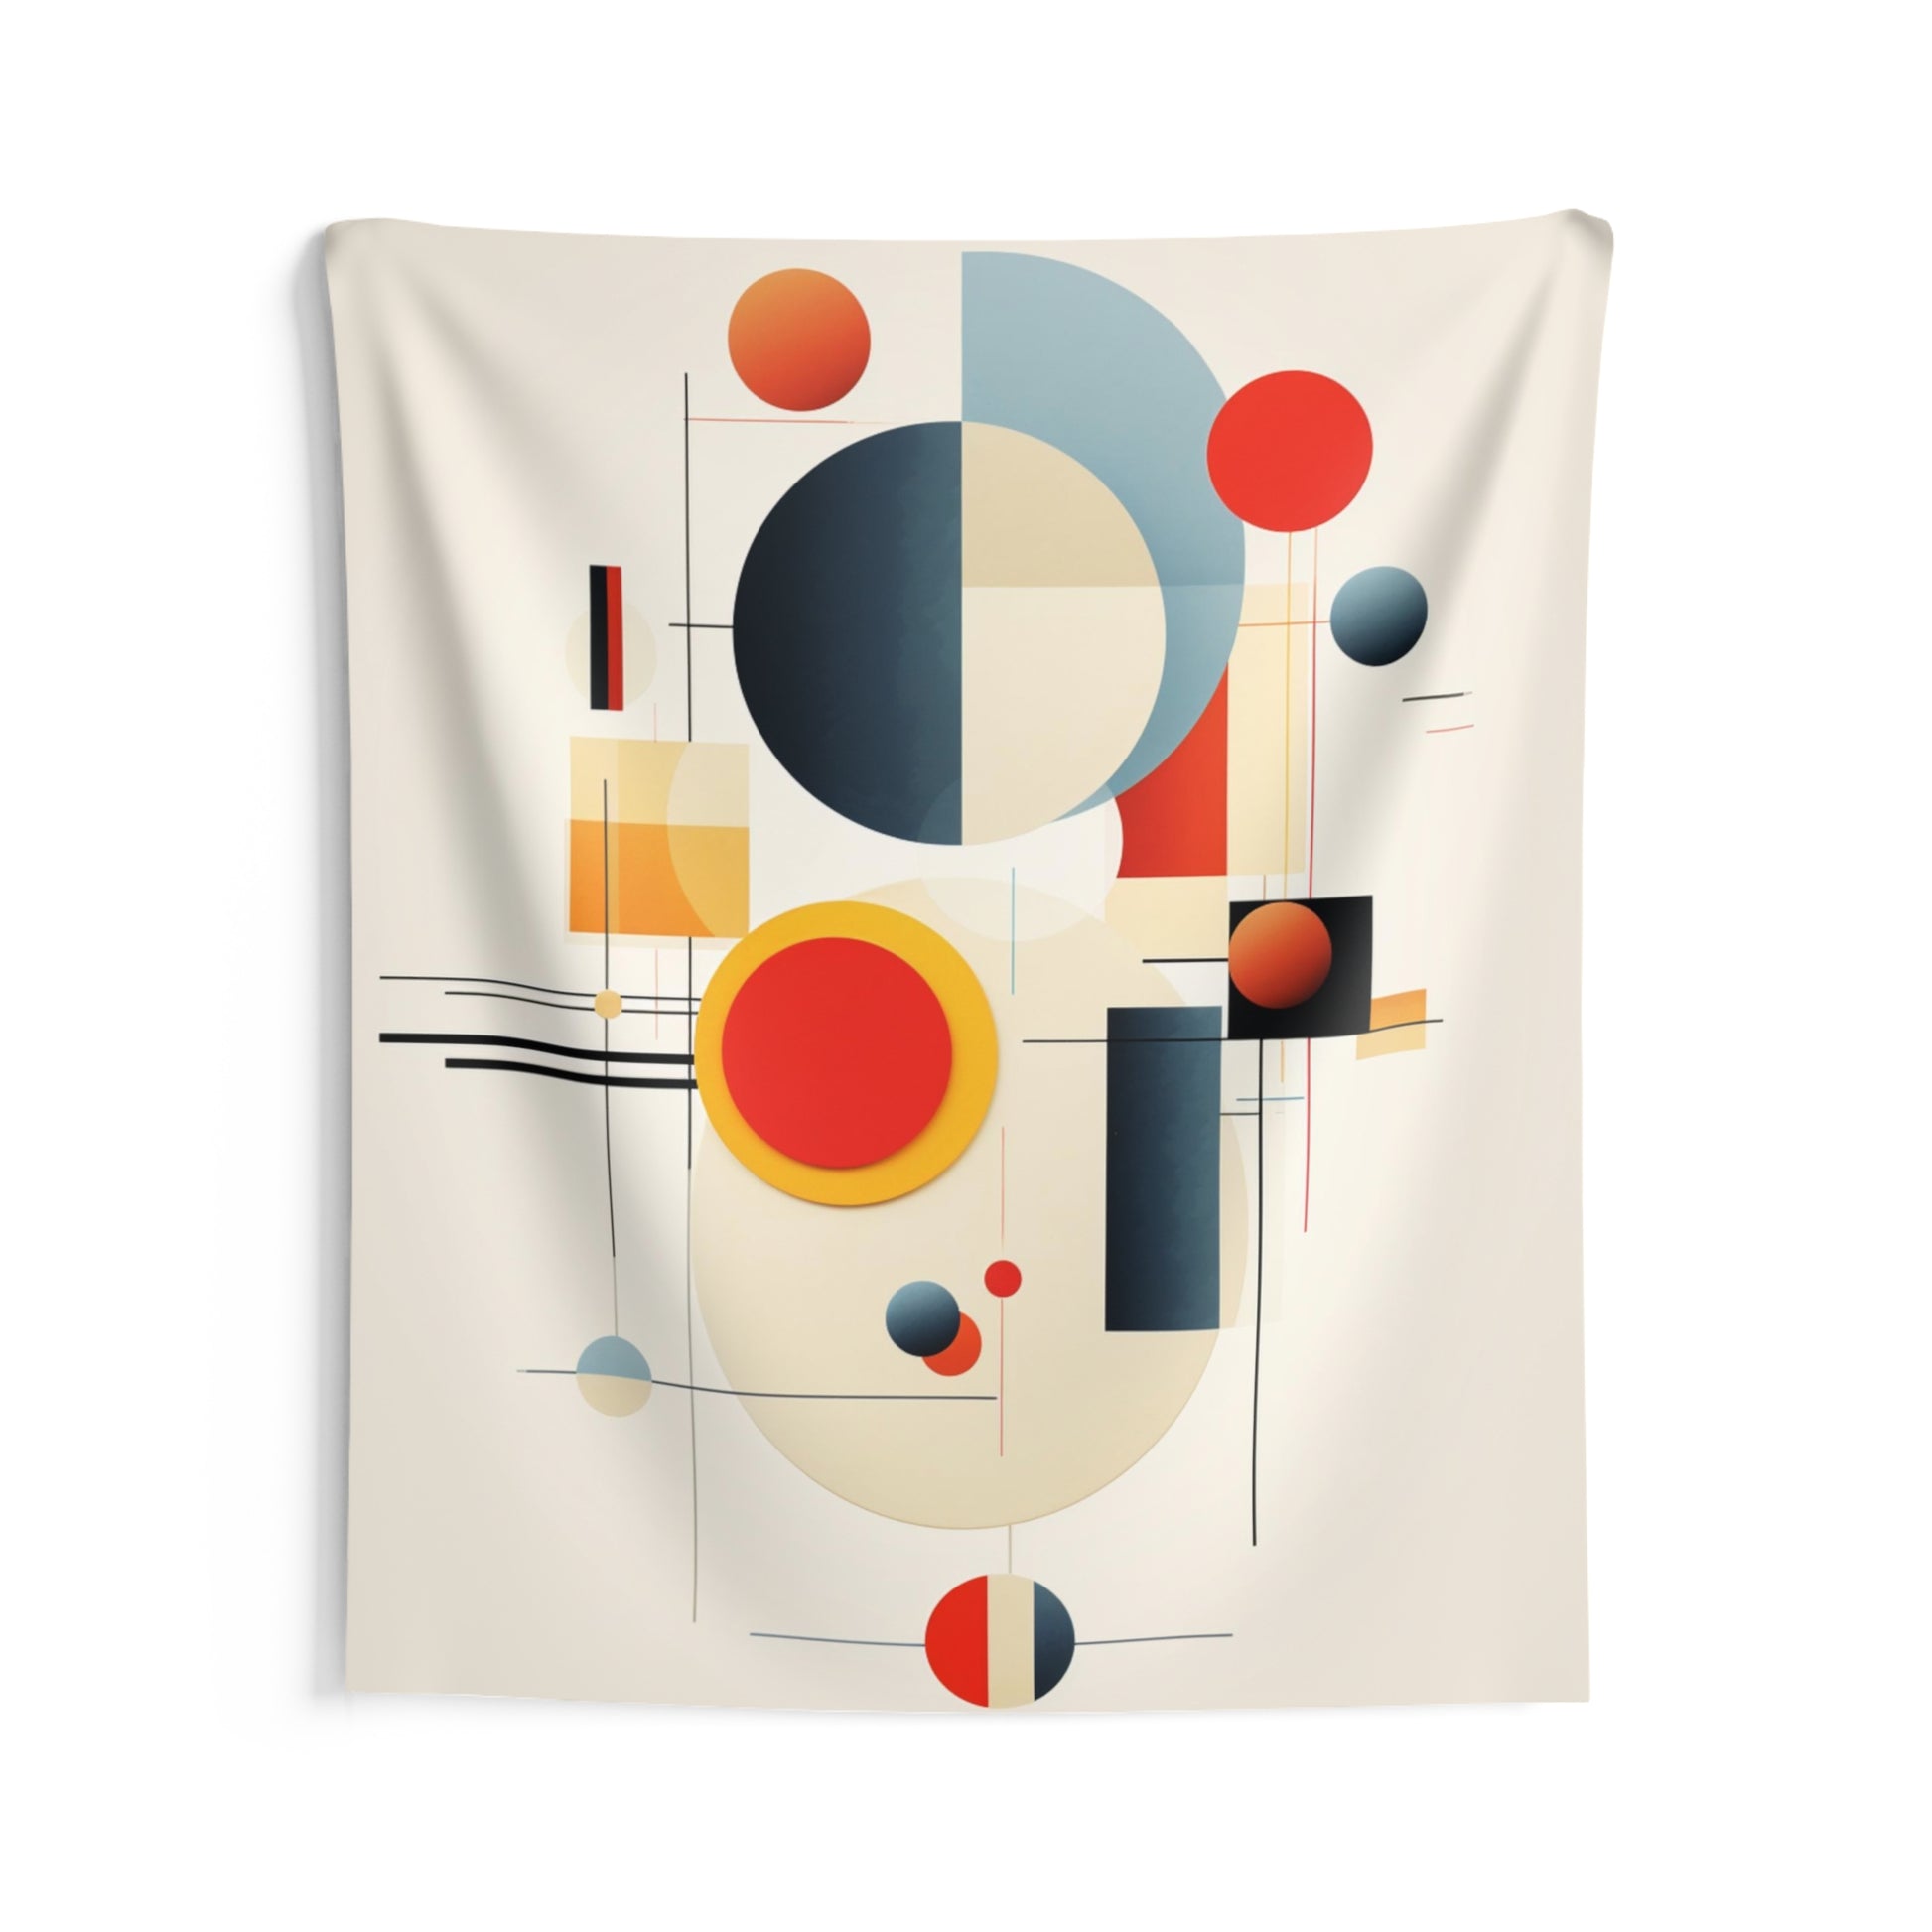 Bauhaus Tapestry, Geometric Abstract Wall Art Hanging Cool Unique Vertical Aesthetic Large Small Decor Bedroom College Dorm Room Starcove Fashion